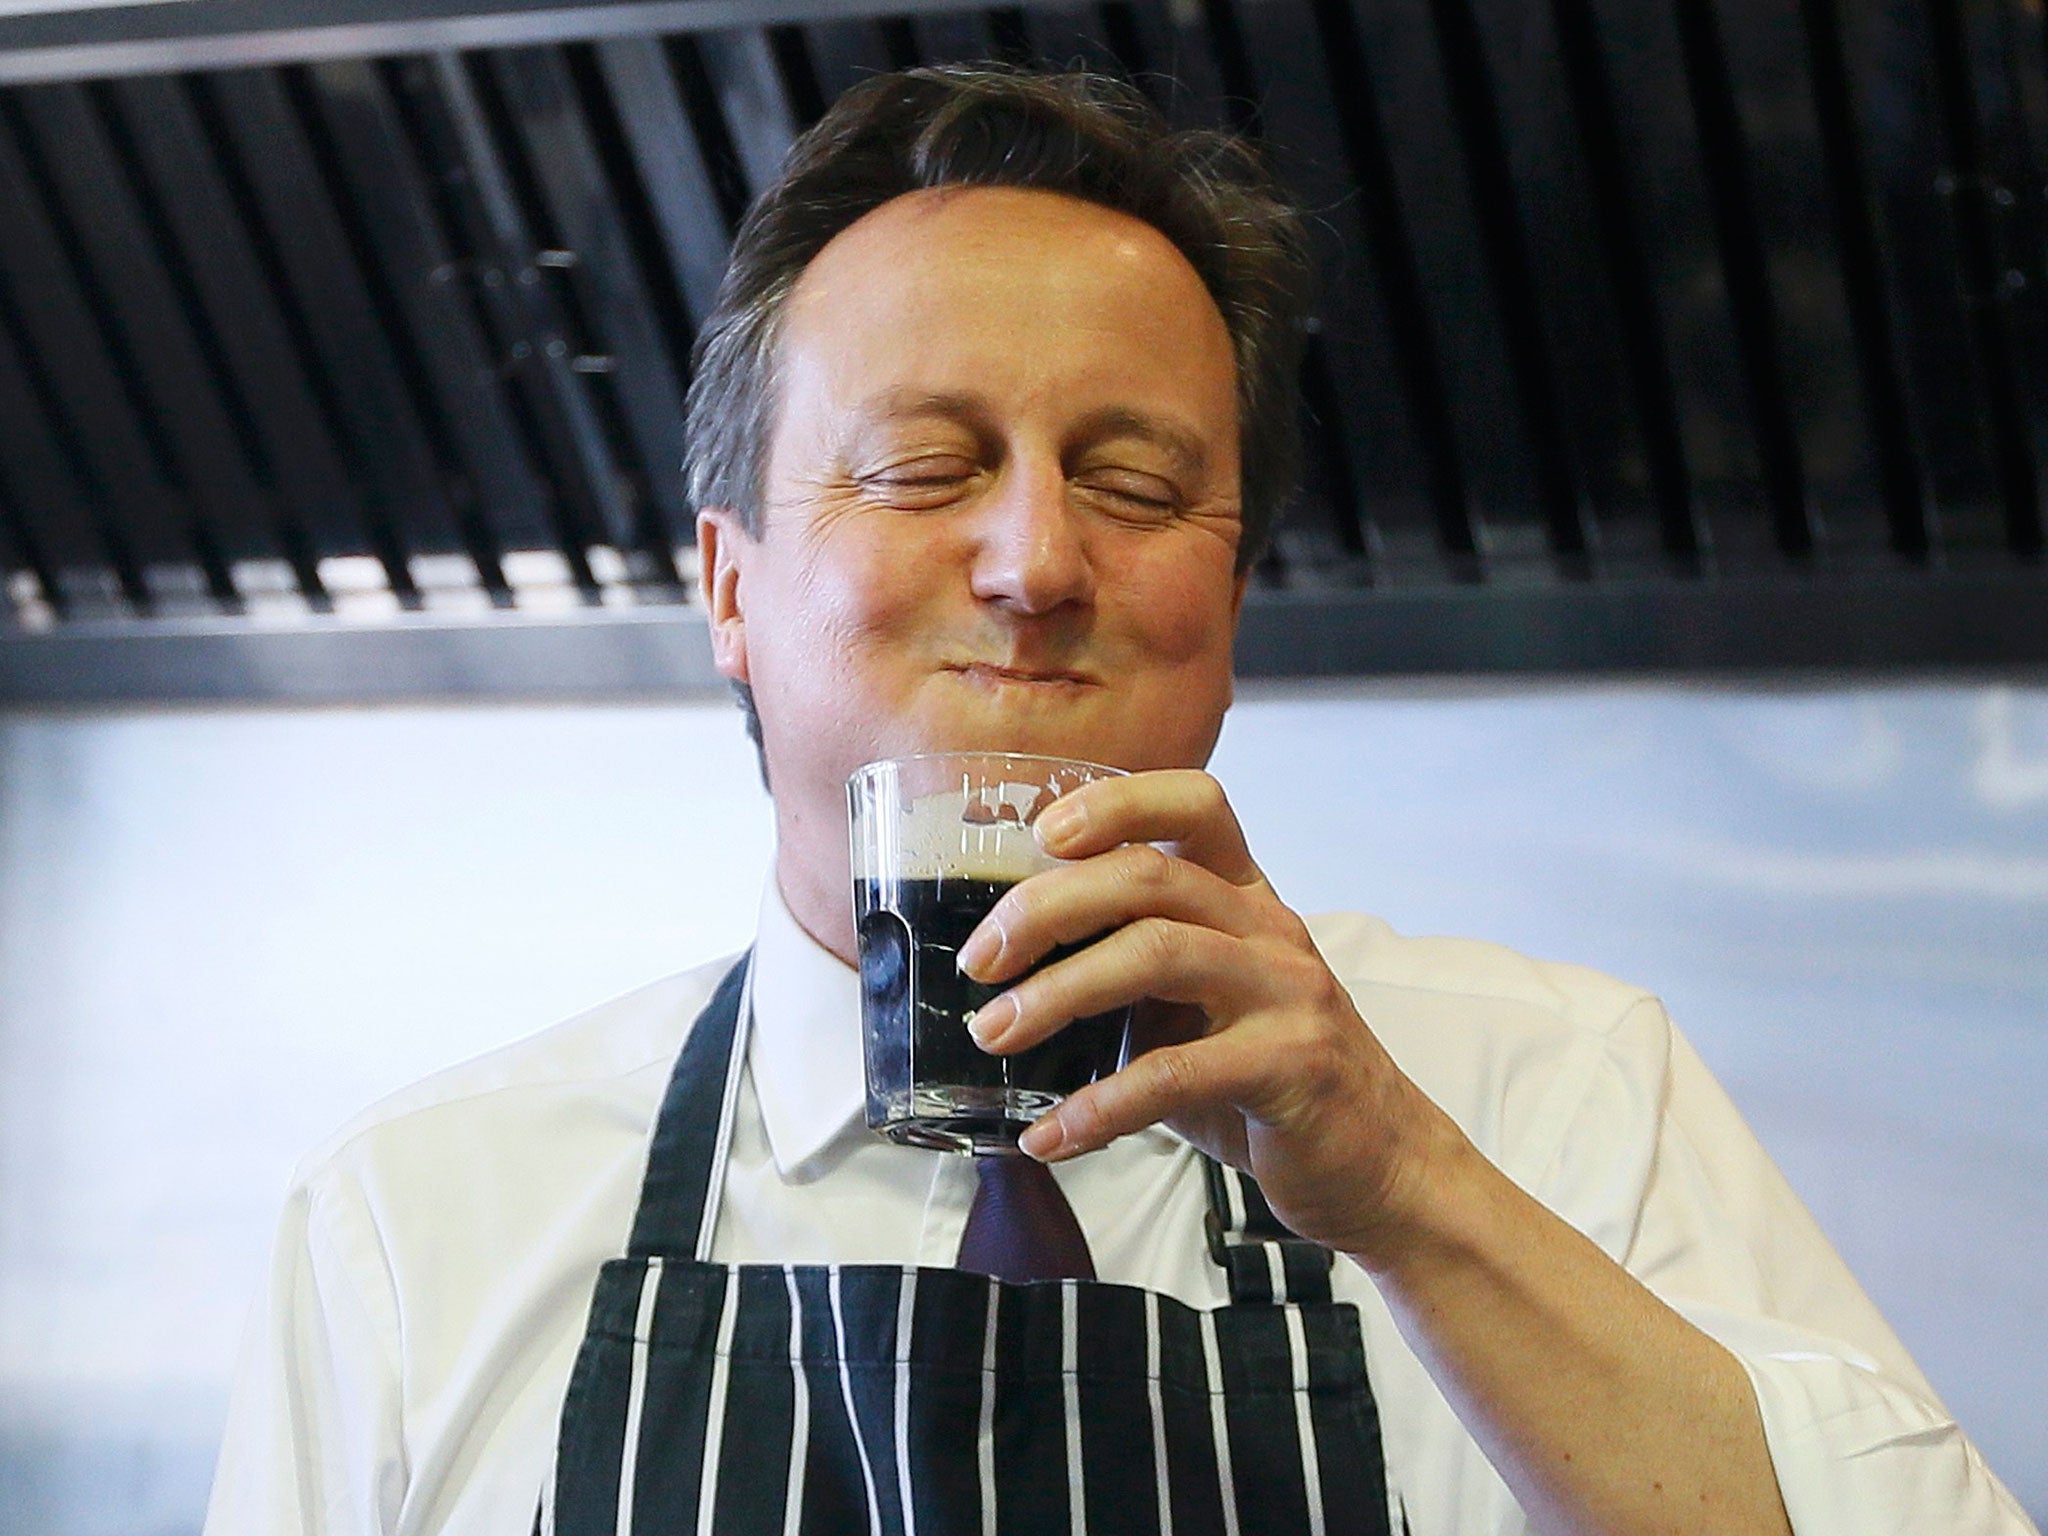 David Cameron tastes some stout during a visit to Brains Brewery in Cardiff